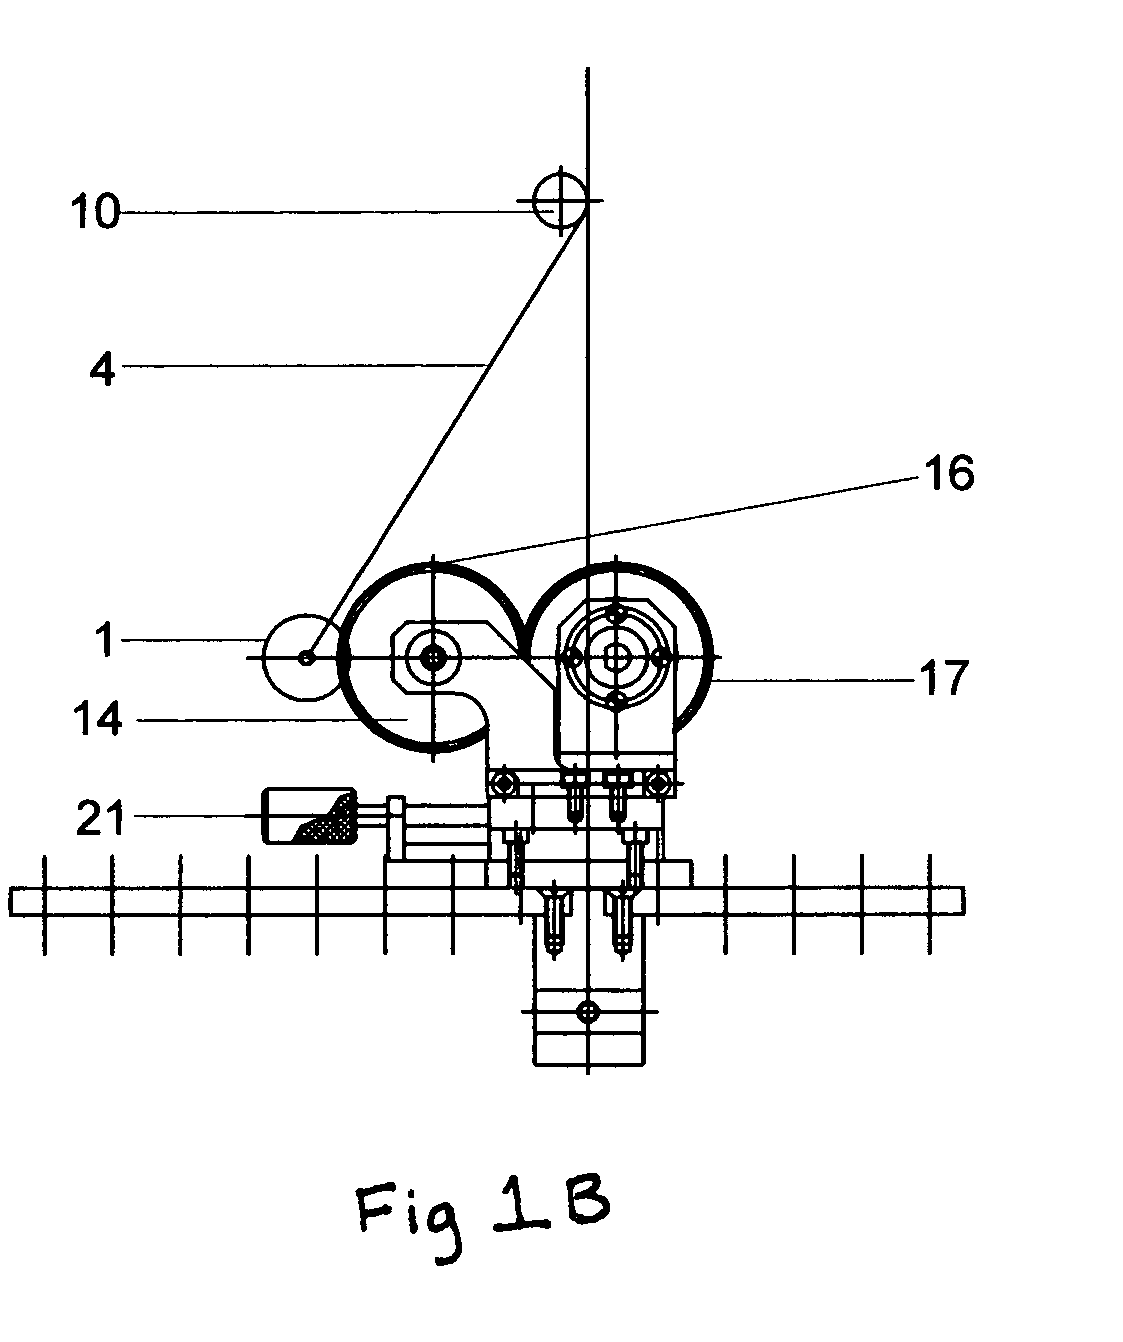 Method and apparatus for testing the rolling tack of pressure-sensitive adhesives